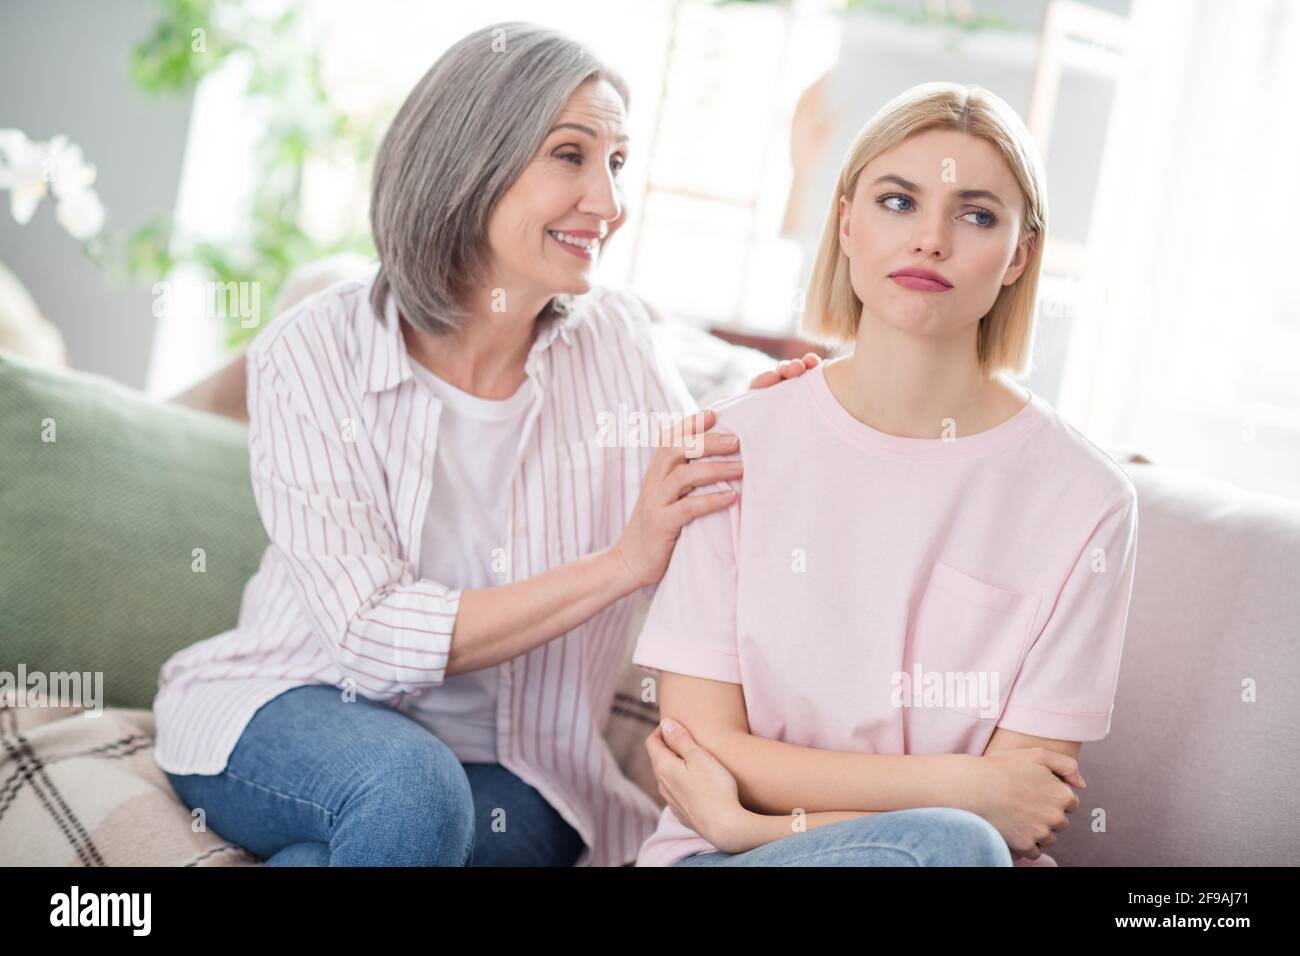 Photo of unhappy sad young woman and happy cheerful grandmother say sorry mistake indoors inside house home Stock Photo